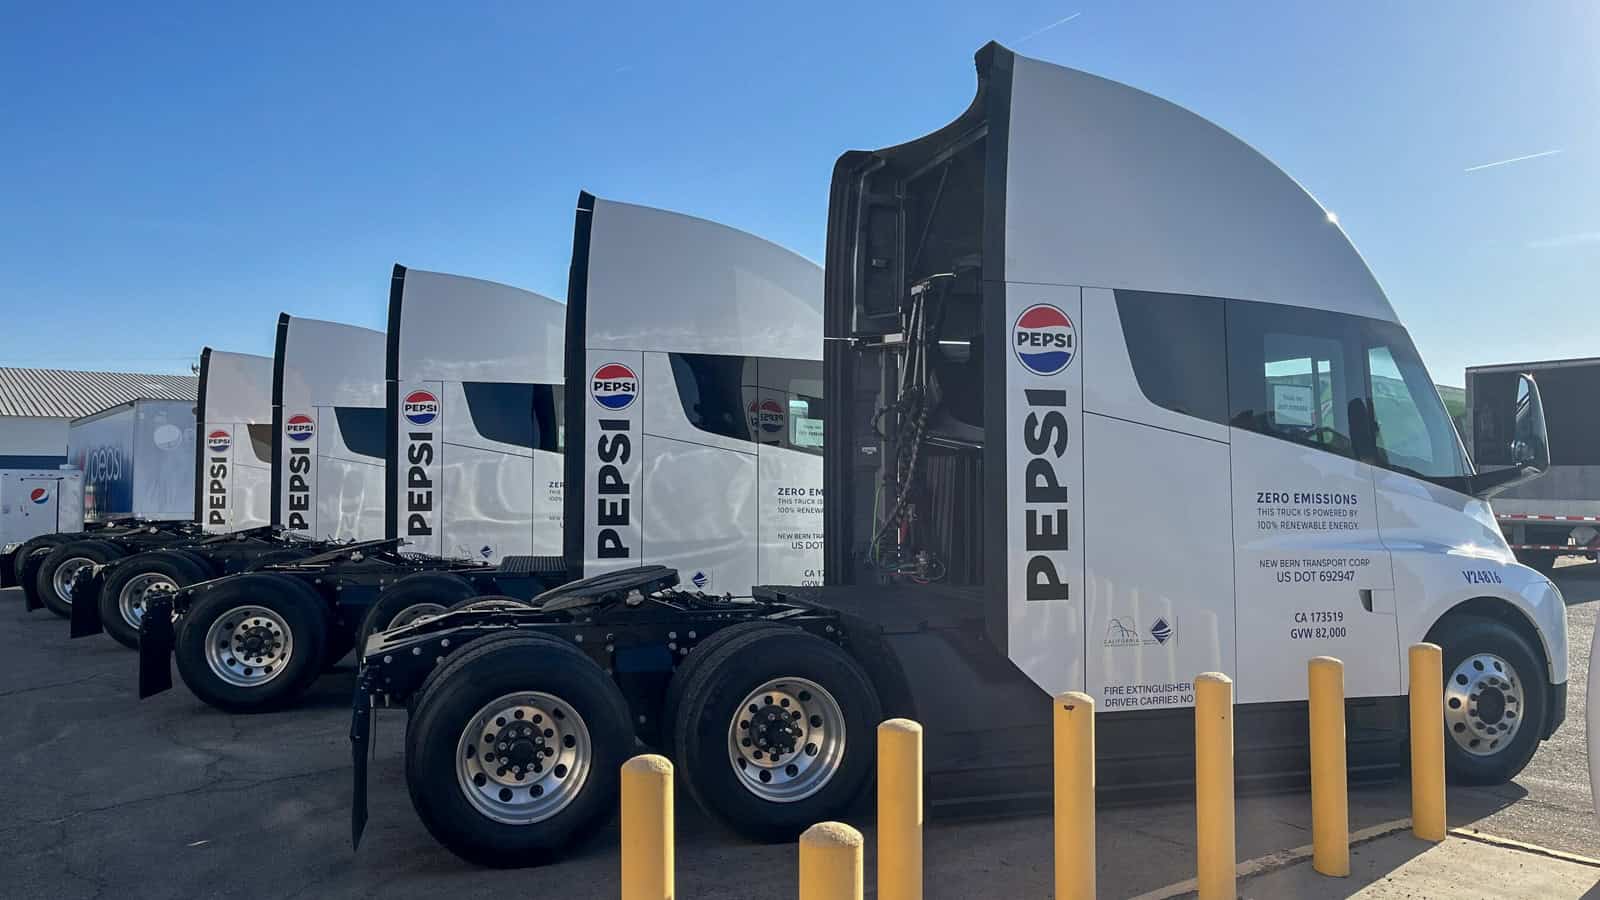 PepsiCo Tesla Semi Trucks Will Operate Out of Fresno Facility and E-Transit Vans Will Serve Customers Across California